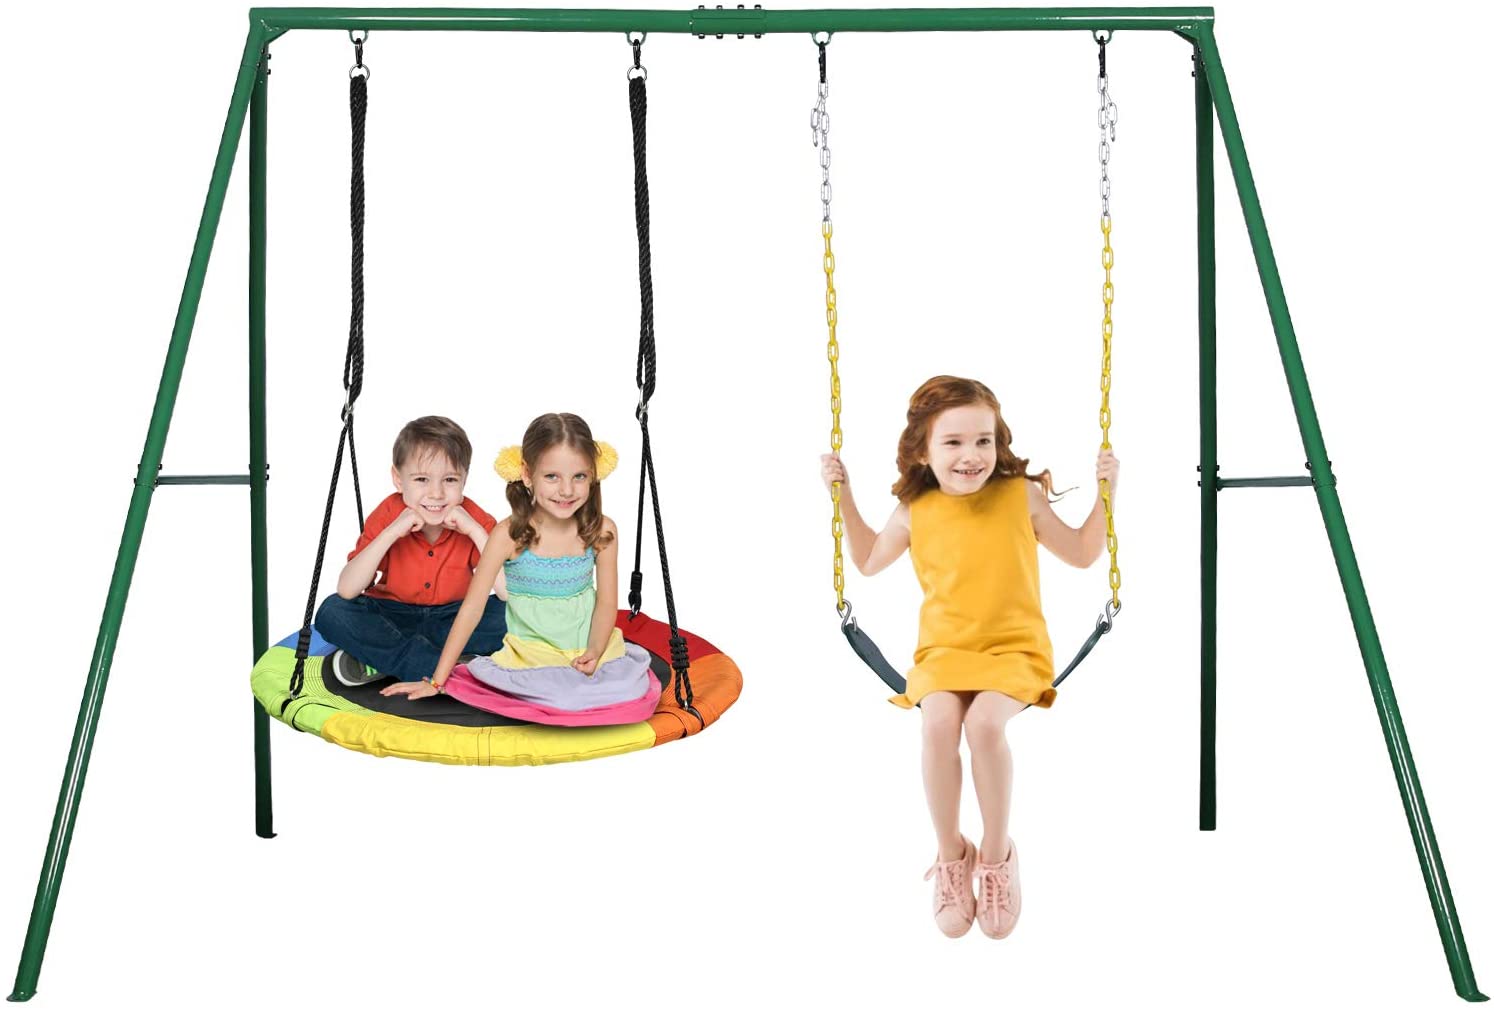 Toddler Baby Swing Kids Playground Garden Home Outdoor Seat Play Fun Toy Safety 